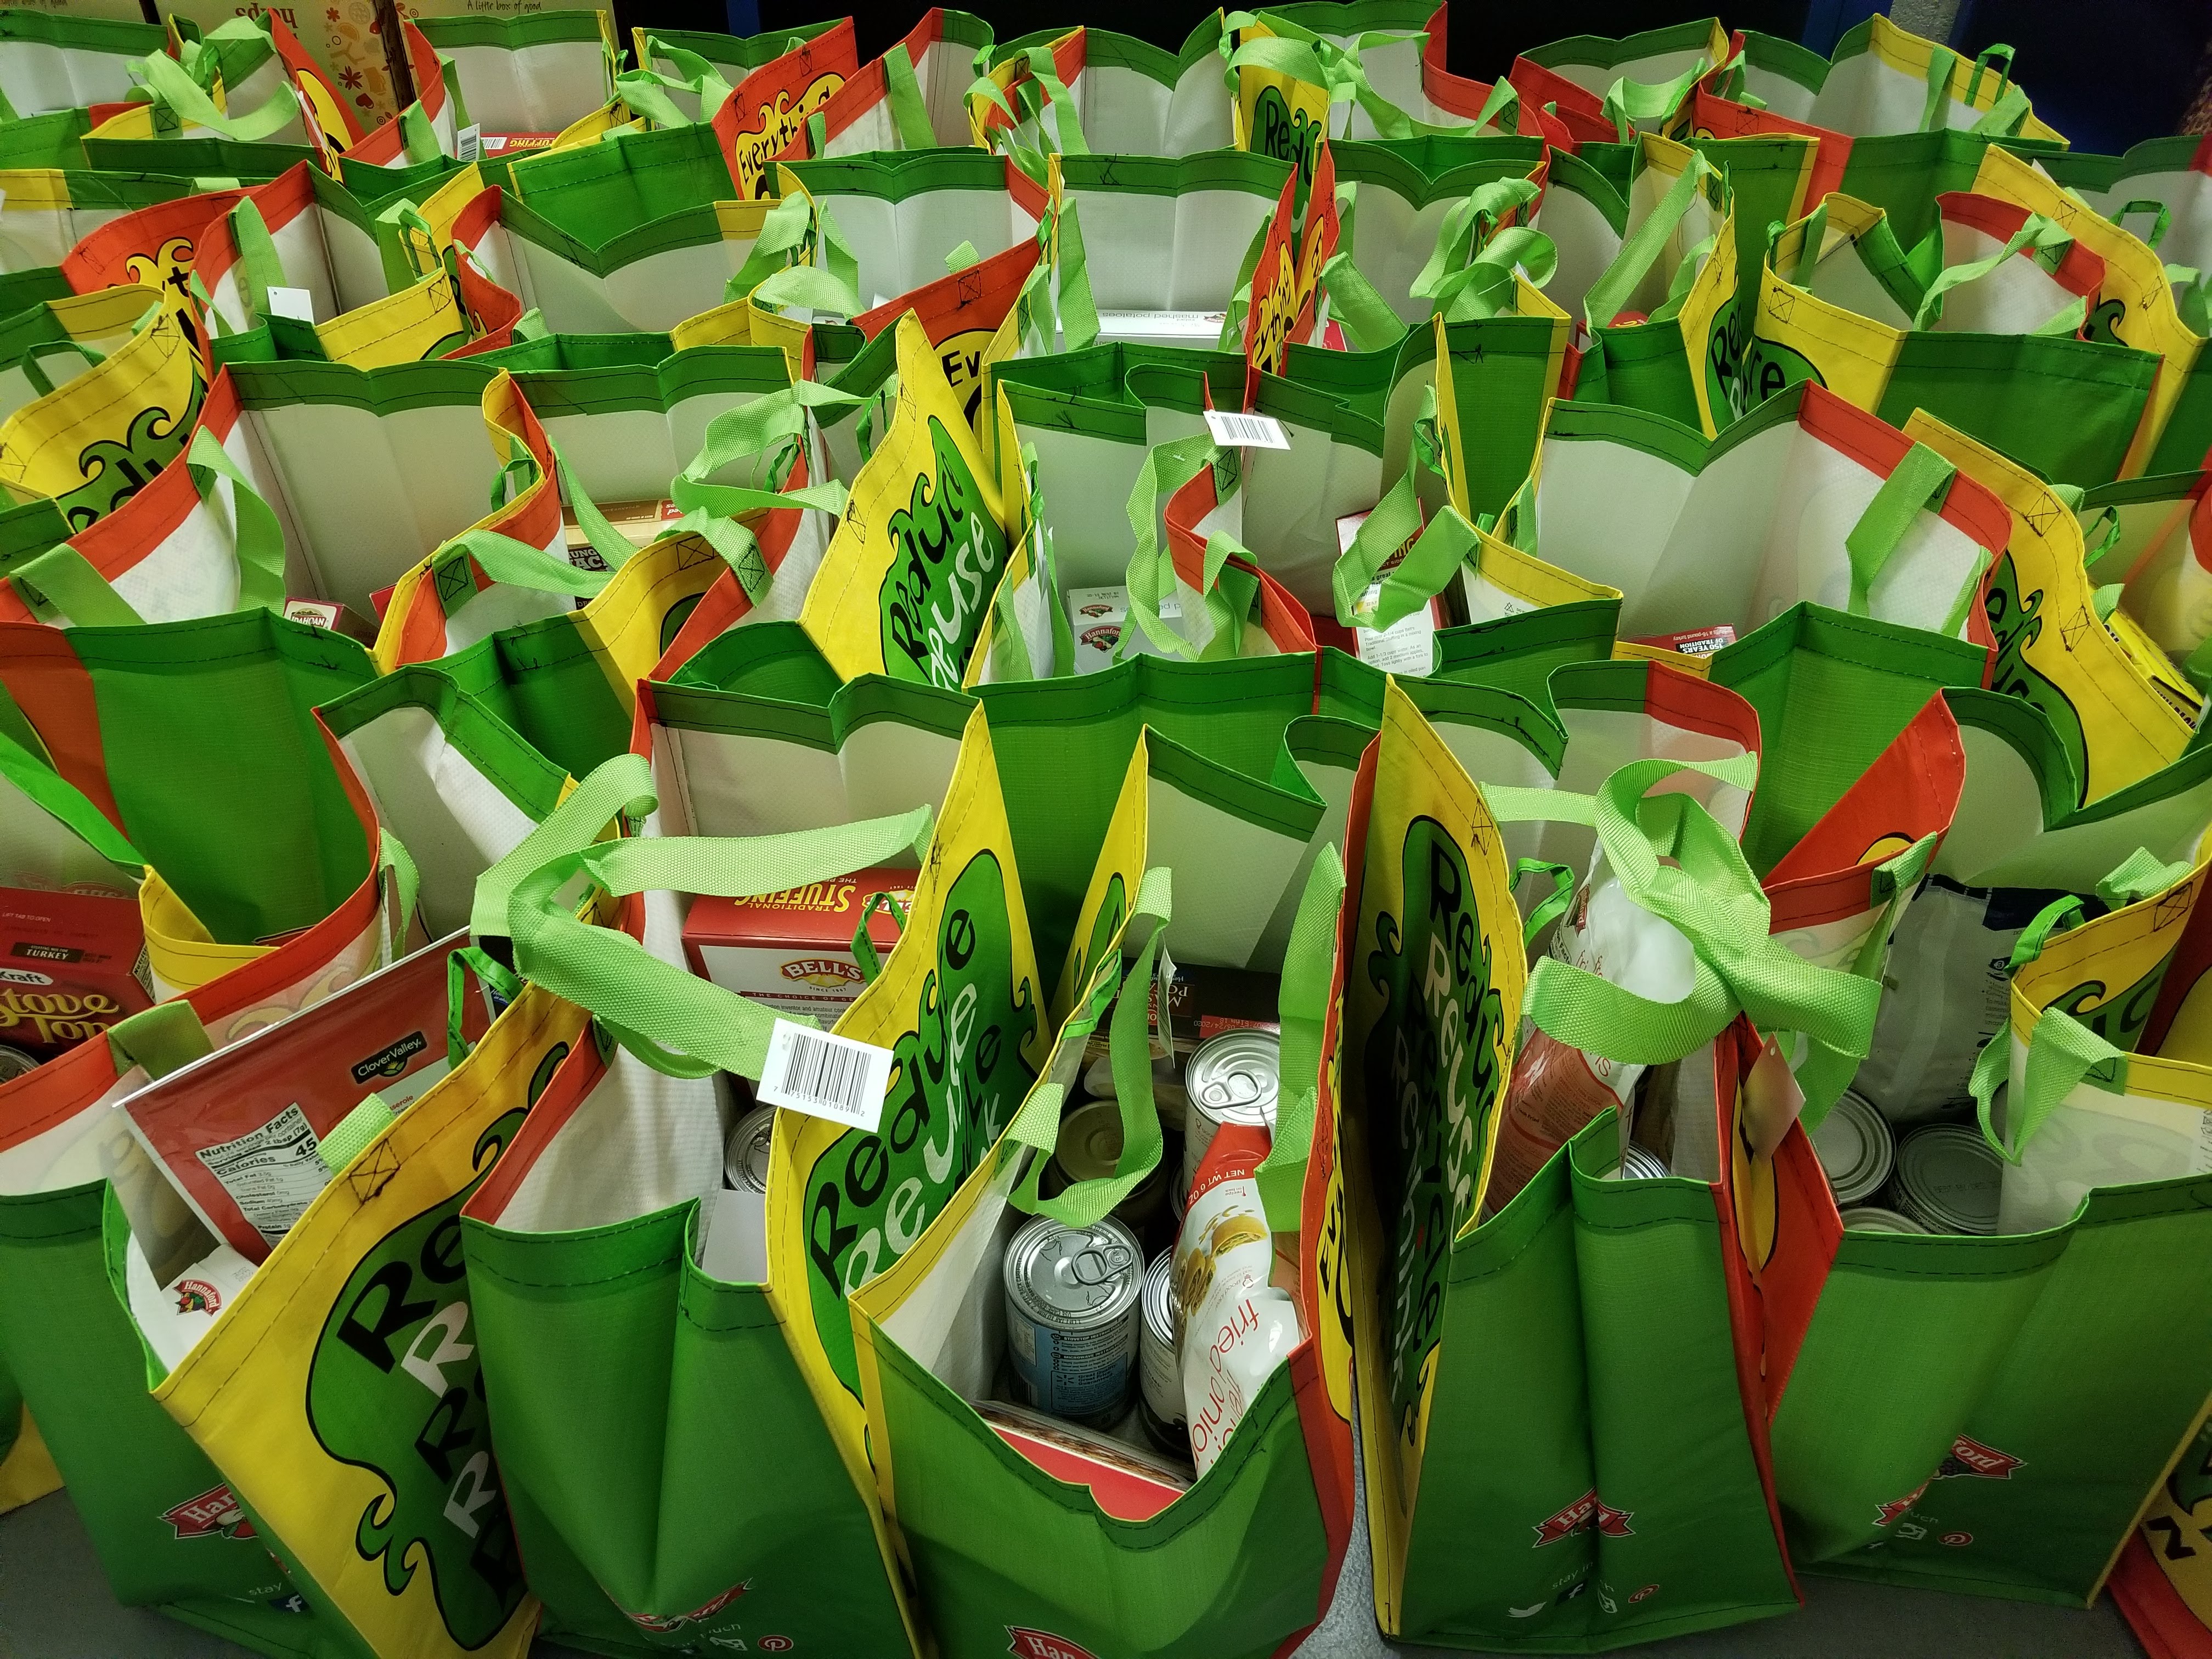 Reusable bags filled with groceries.